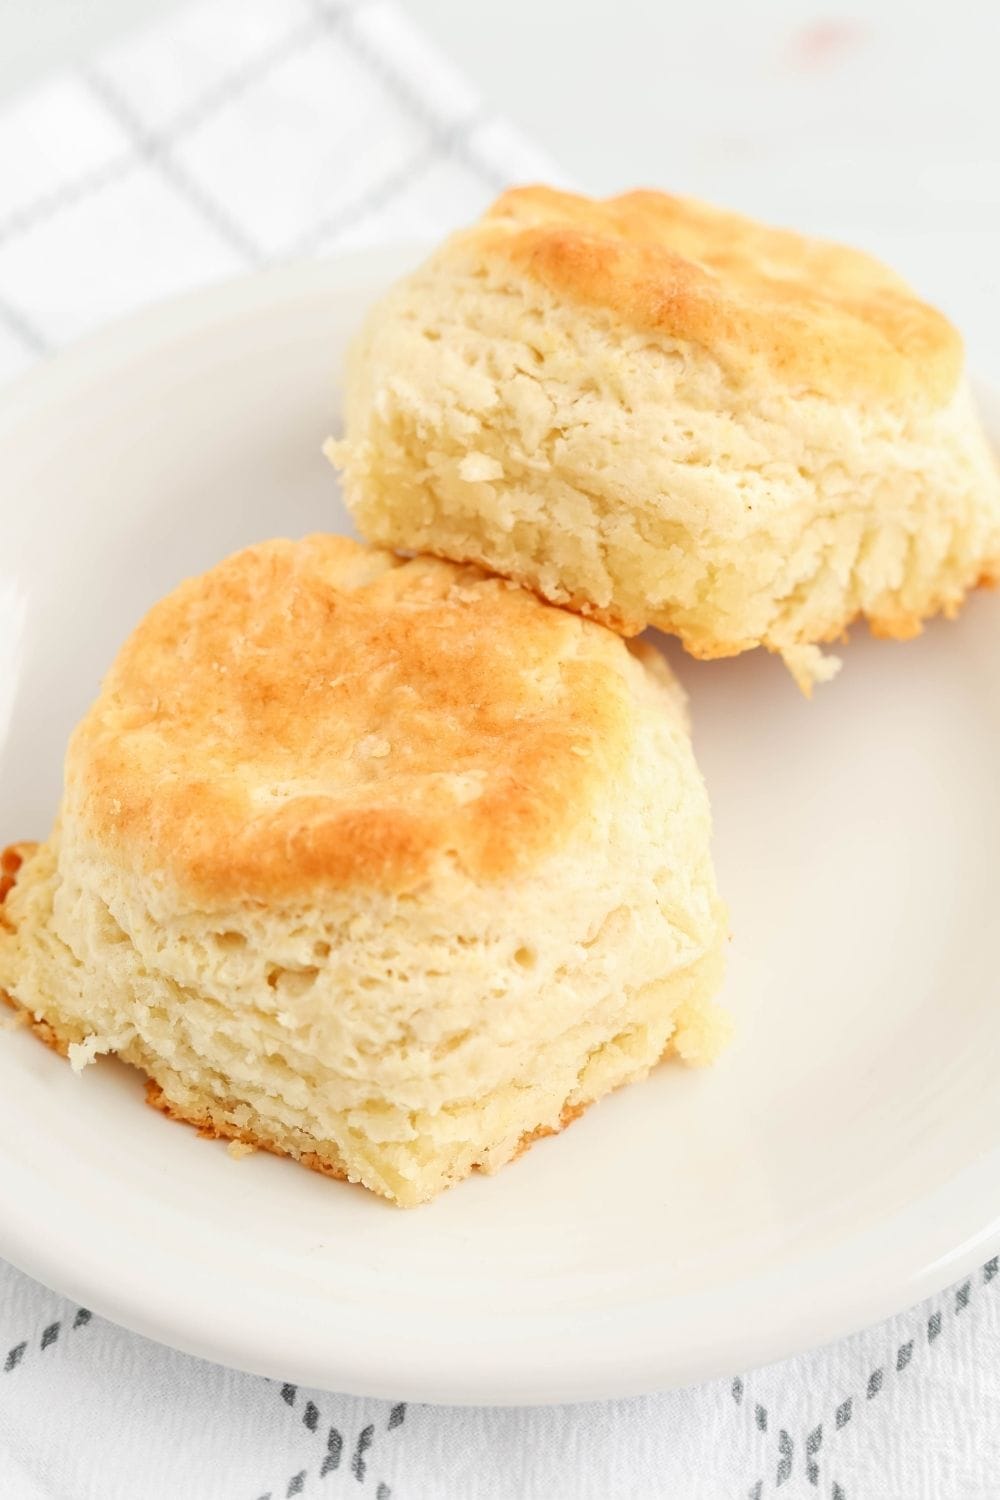 two cut and rolled Bisquick biscuits, freshly baked and served on a white plate.